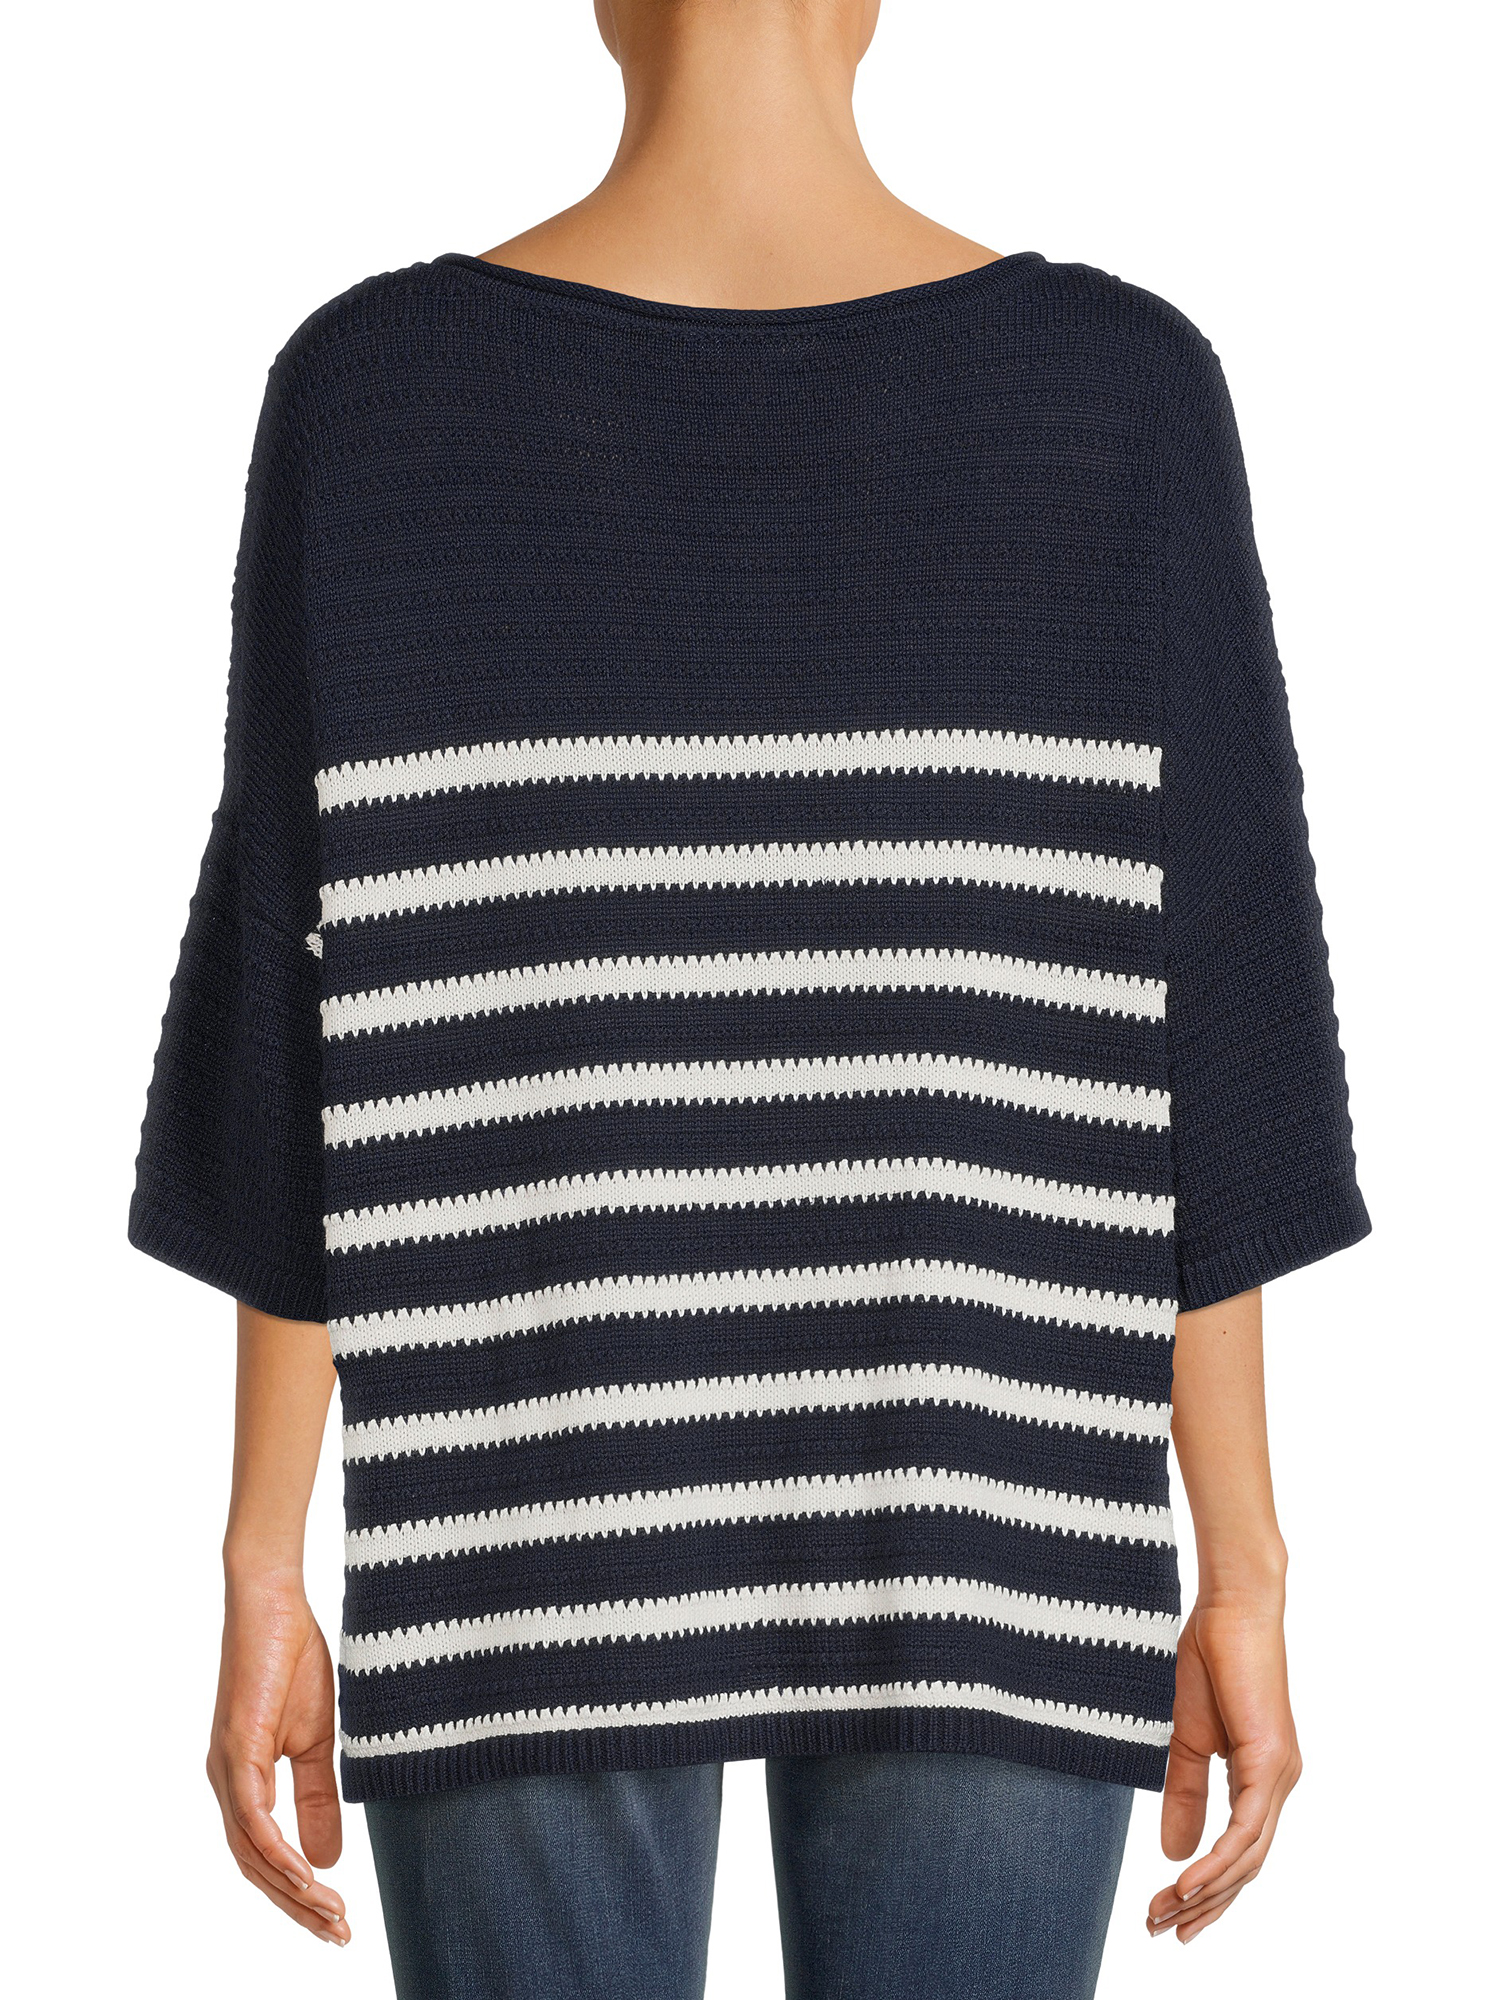 Time and Tru Women’s Boatneck Sweater - image 5 of 5